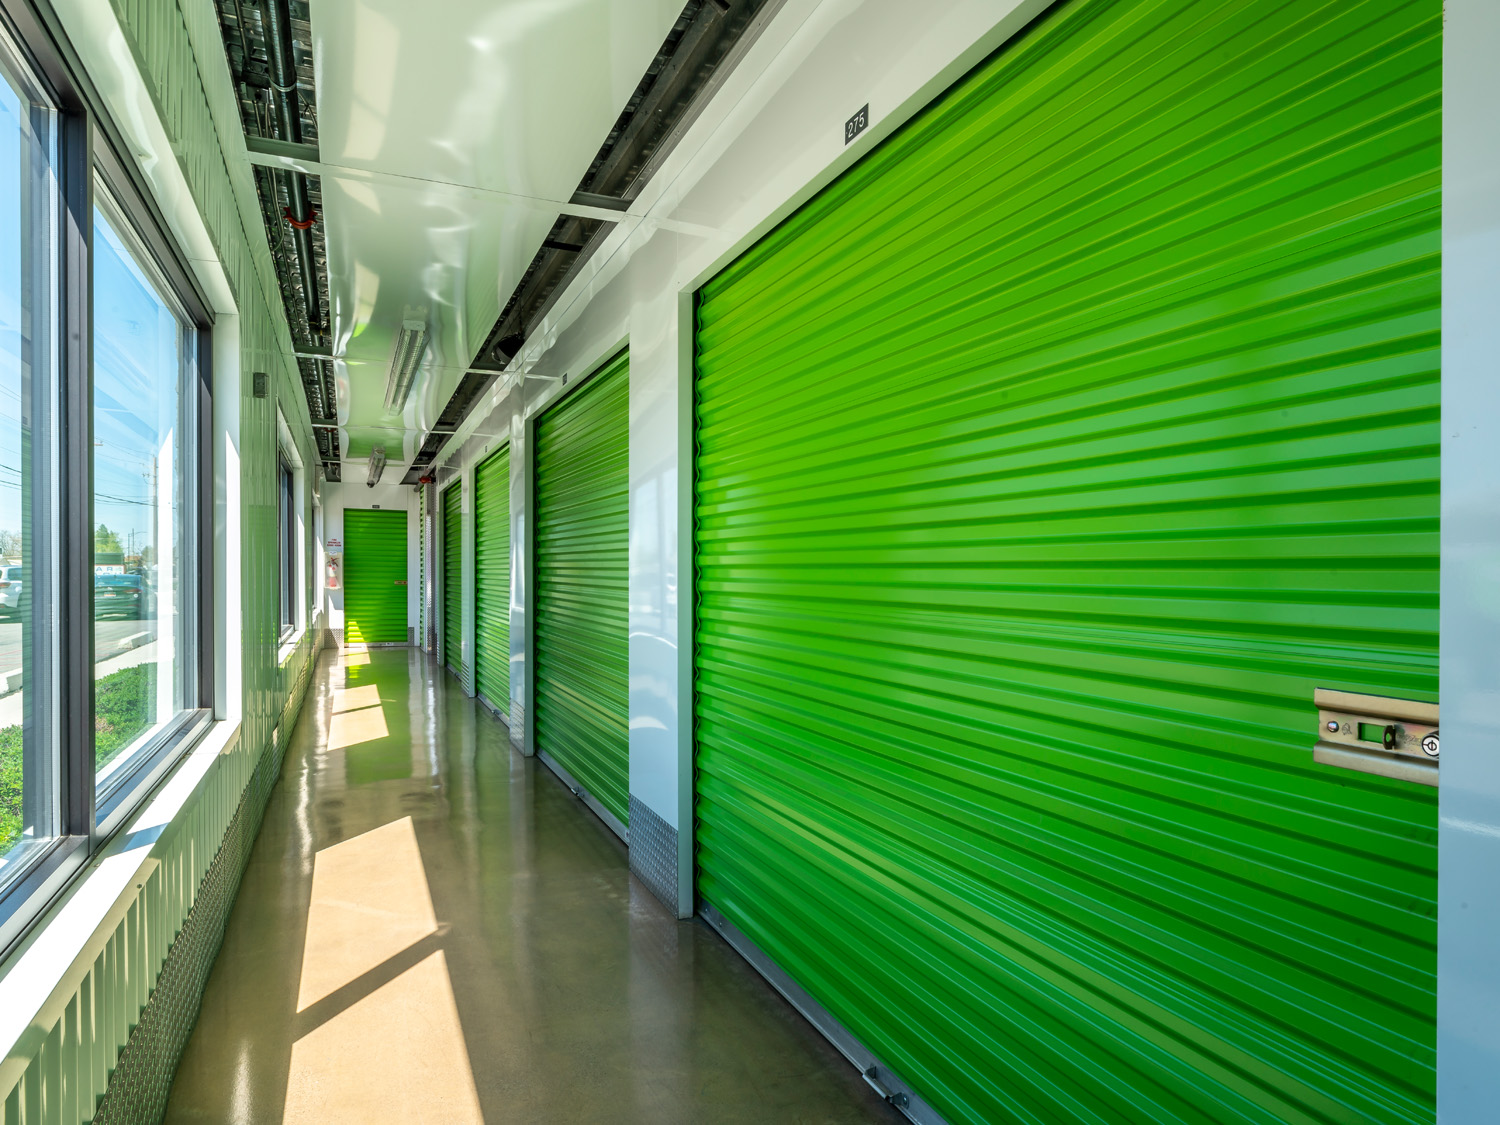 View down a hallway of an Extra Space Storage facility; hallways is clean, well-lit, and has bright green garage-like doors